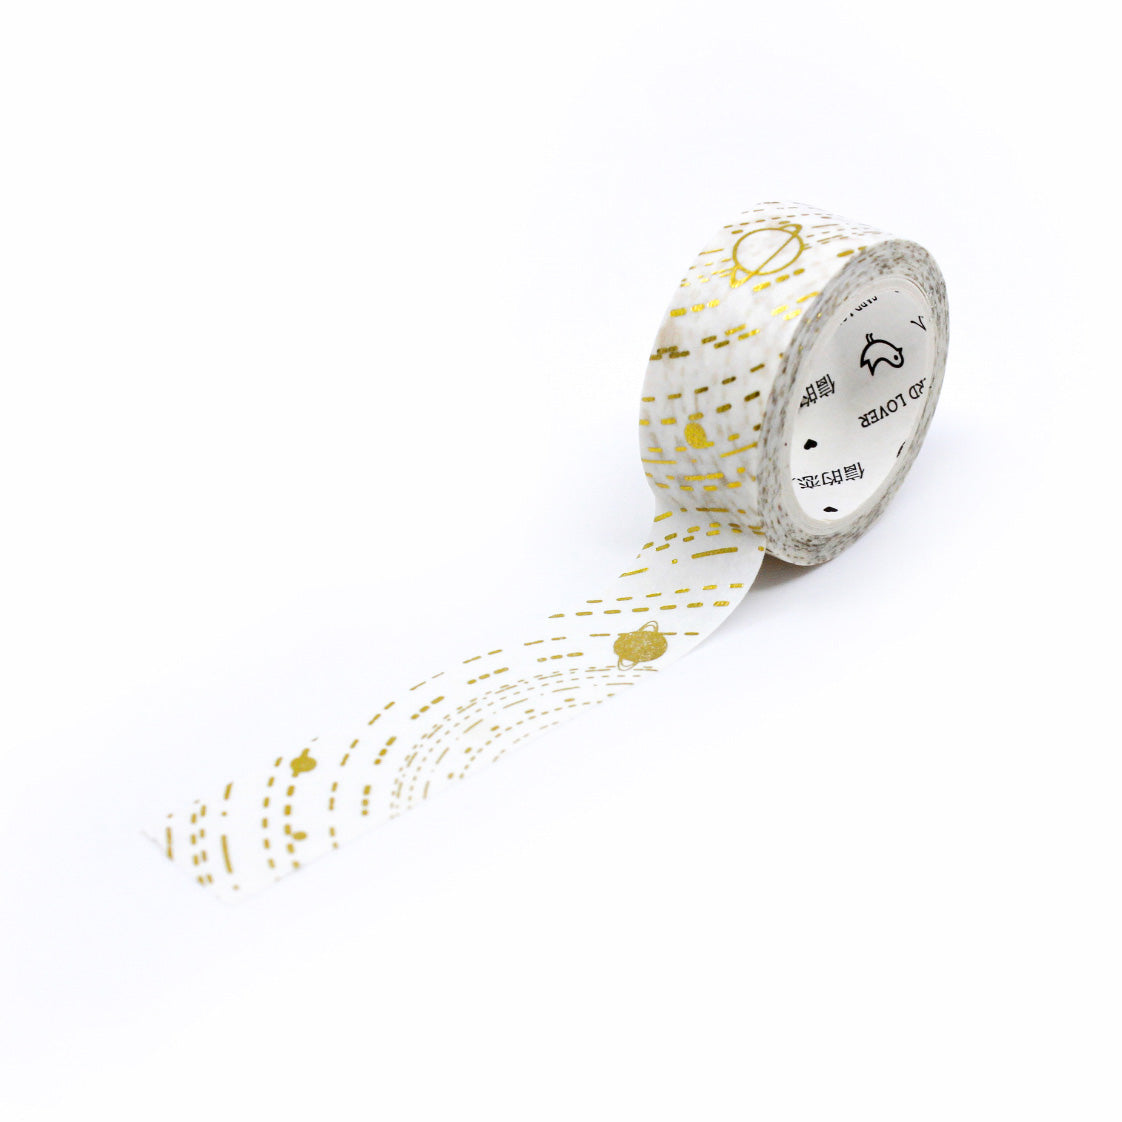 Illuminate your projects with our Gold Foil Starry Night Sky Constellation Washi Tape, adorned with sparkling constellations in a shimmering gold finish. Ideal for adding a touch of celestial wonder to your crafts. This tape is sold at BBB Supplies Craft Shop.